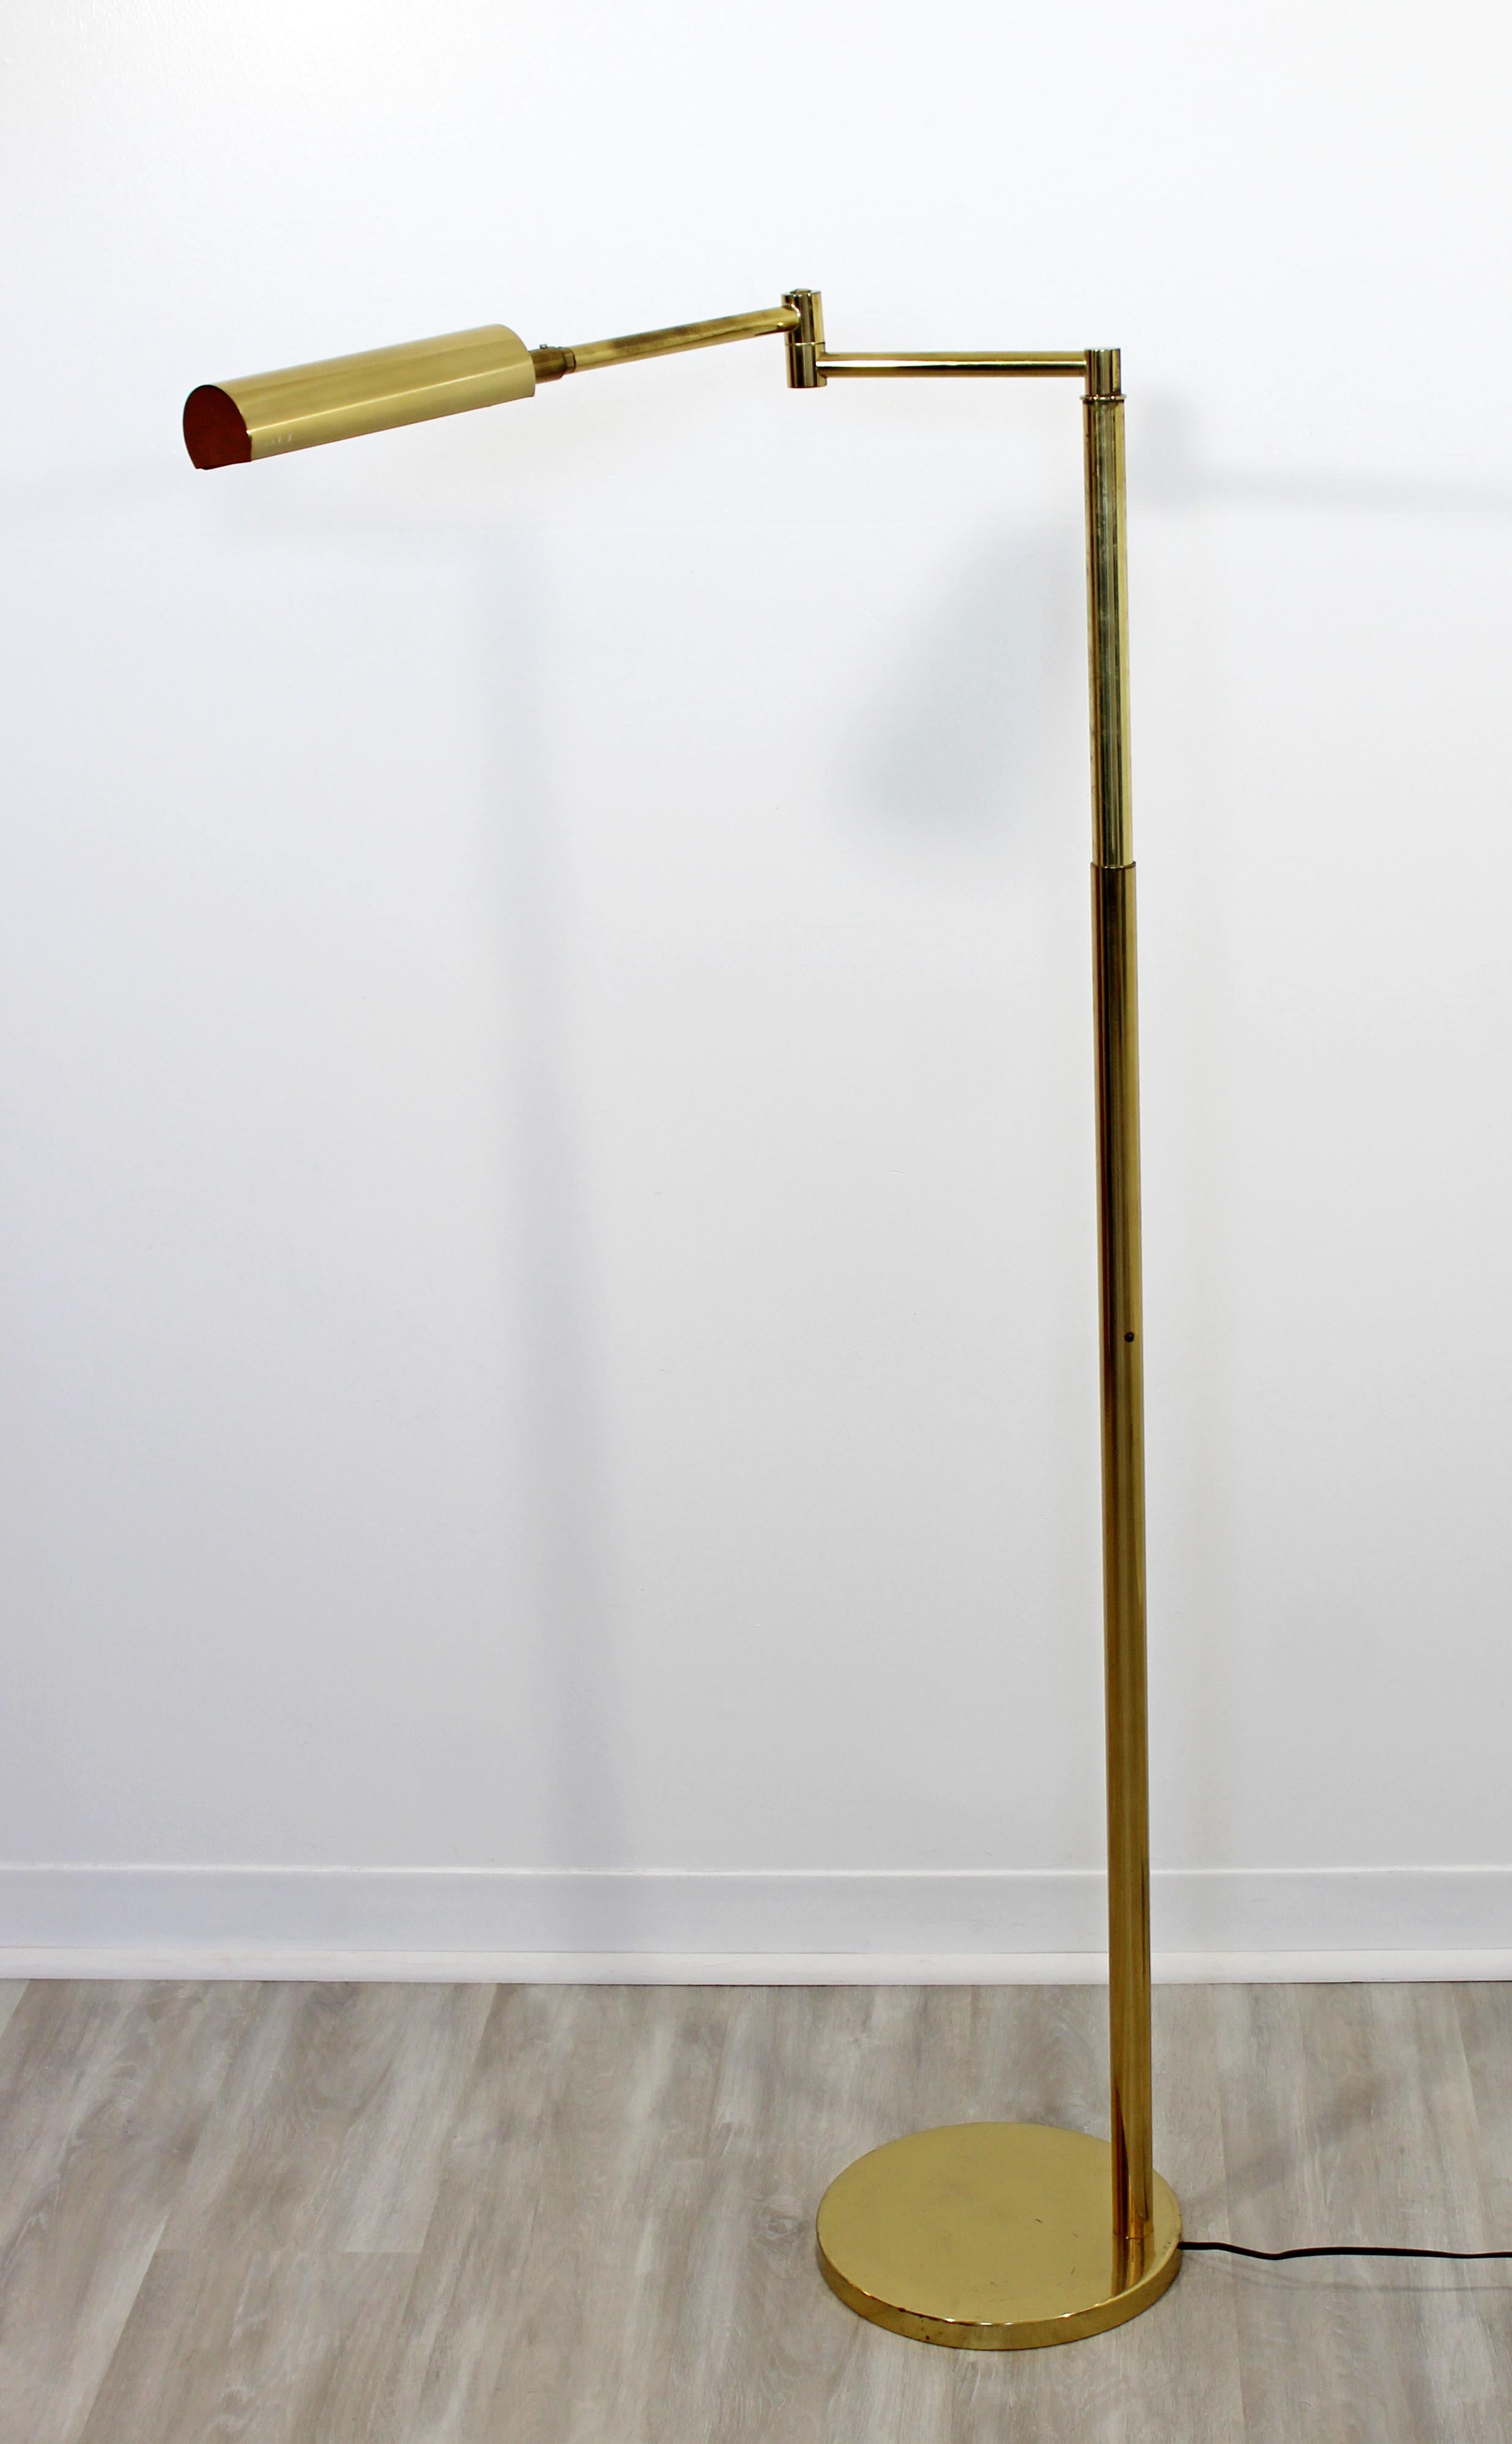 For your consideration is a fantastic, brass, adjustable reading floor lamp by Koch & Lowy, circa the 1970s. Adjustable stem and rotating shade, with dimmer switch. In excellent condition. The dimensions are 10